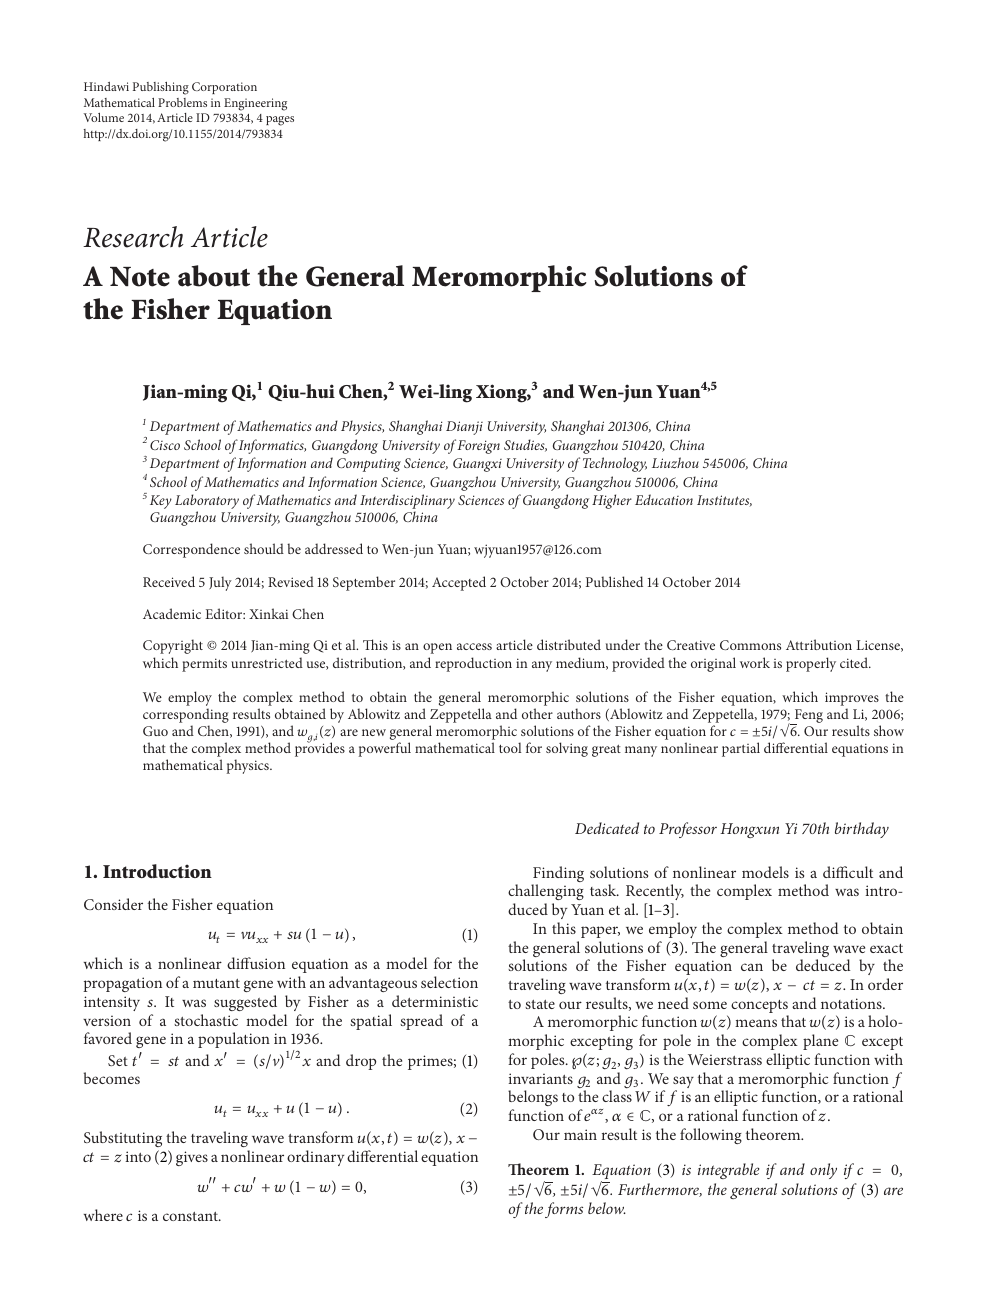 A Note About The General Meromorphic Solutions Of The Fisher Equation Topic Of Research Paper In Mathematics Download Scholarly Article Pdf And Read For Free On Cyberleninka Open Science Hub